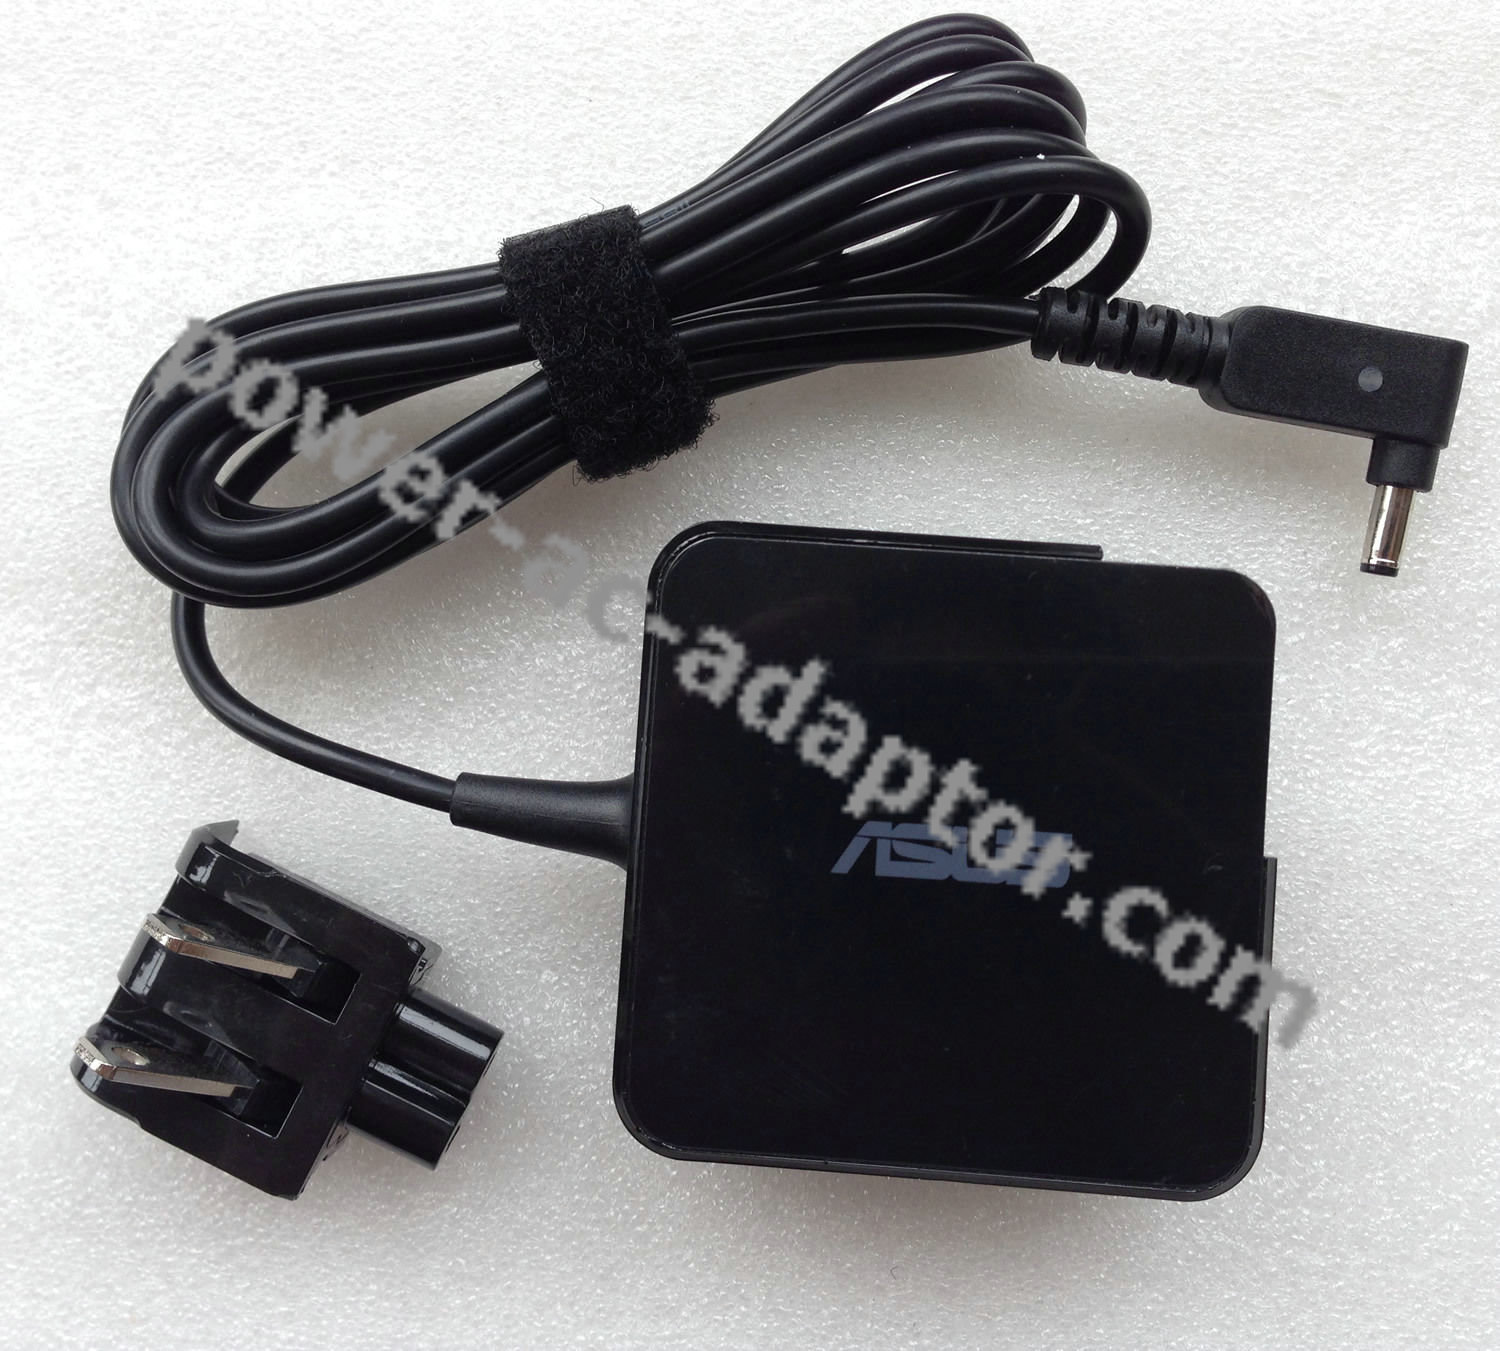 ASUS 33W AC Power Adapter for ASUS X200CA-KX186D Notebook